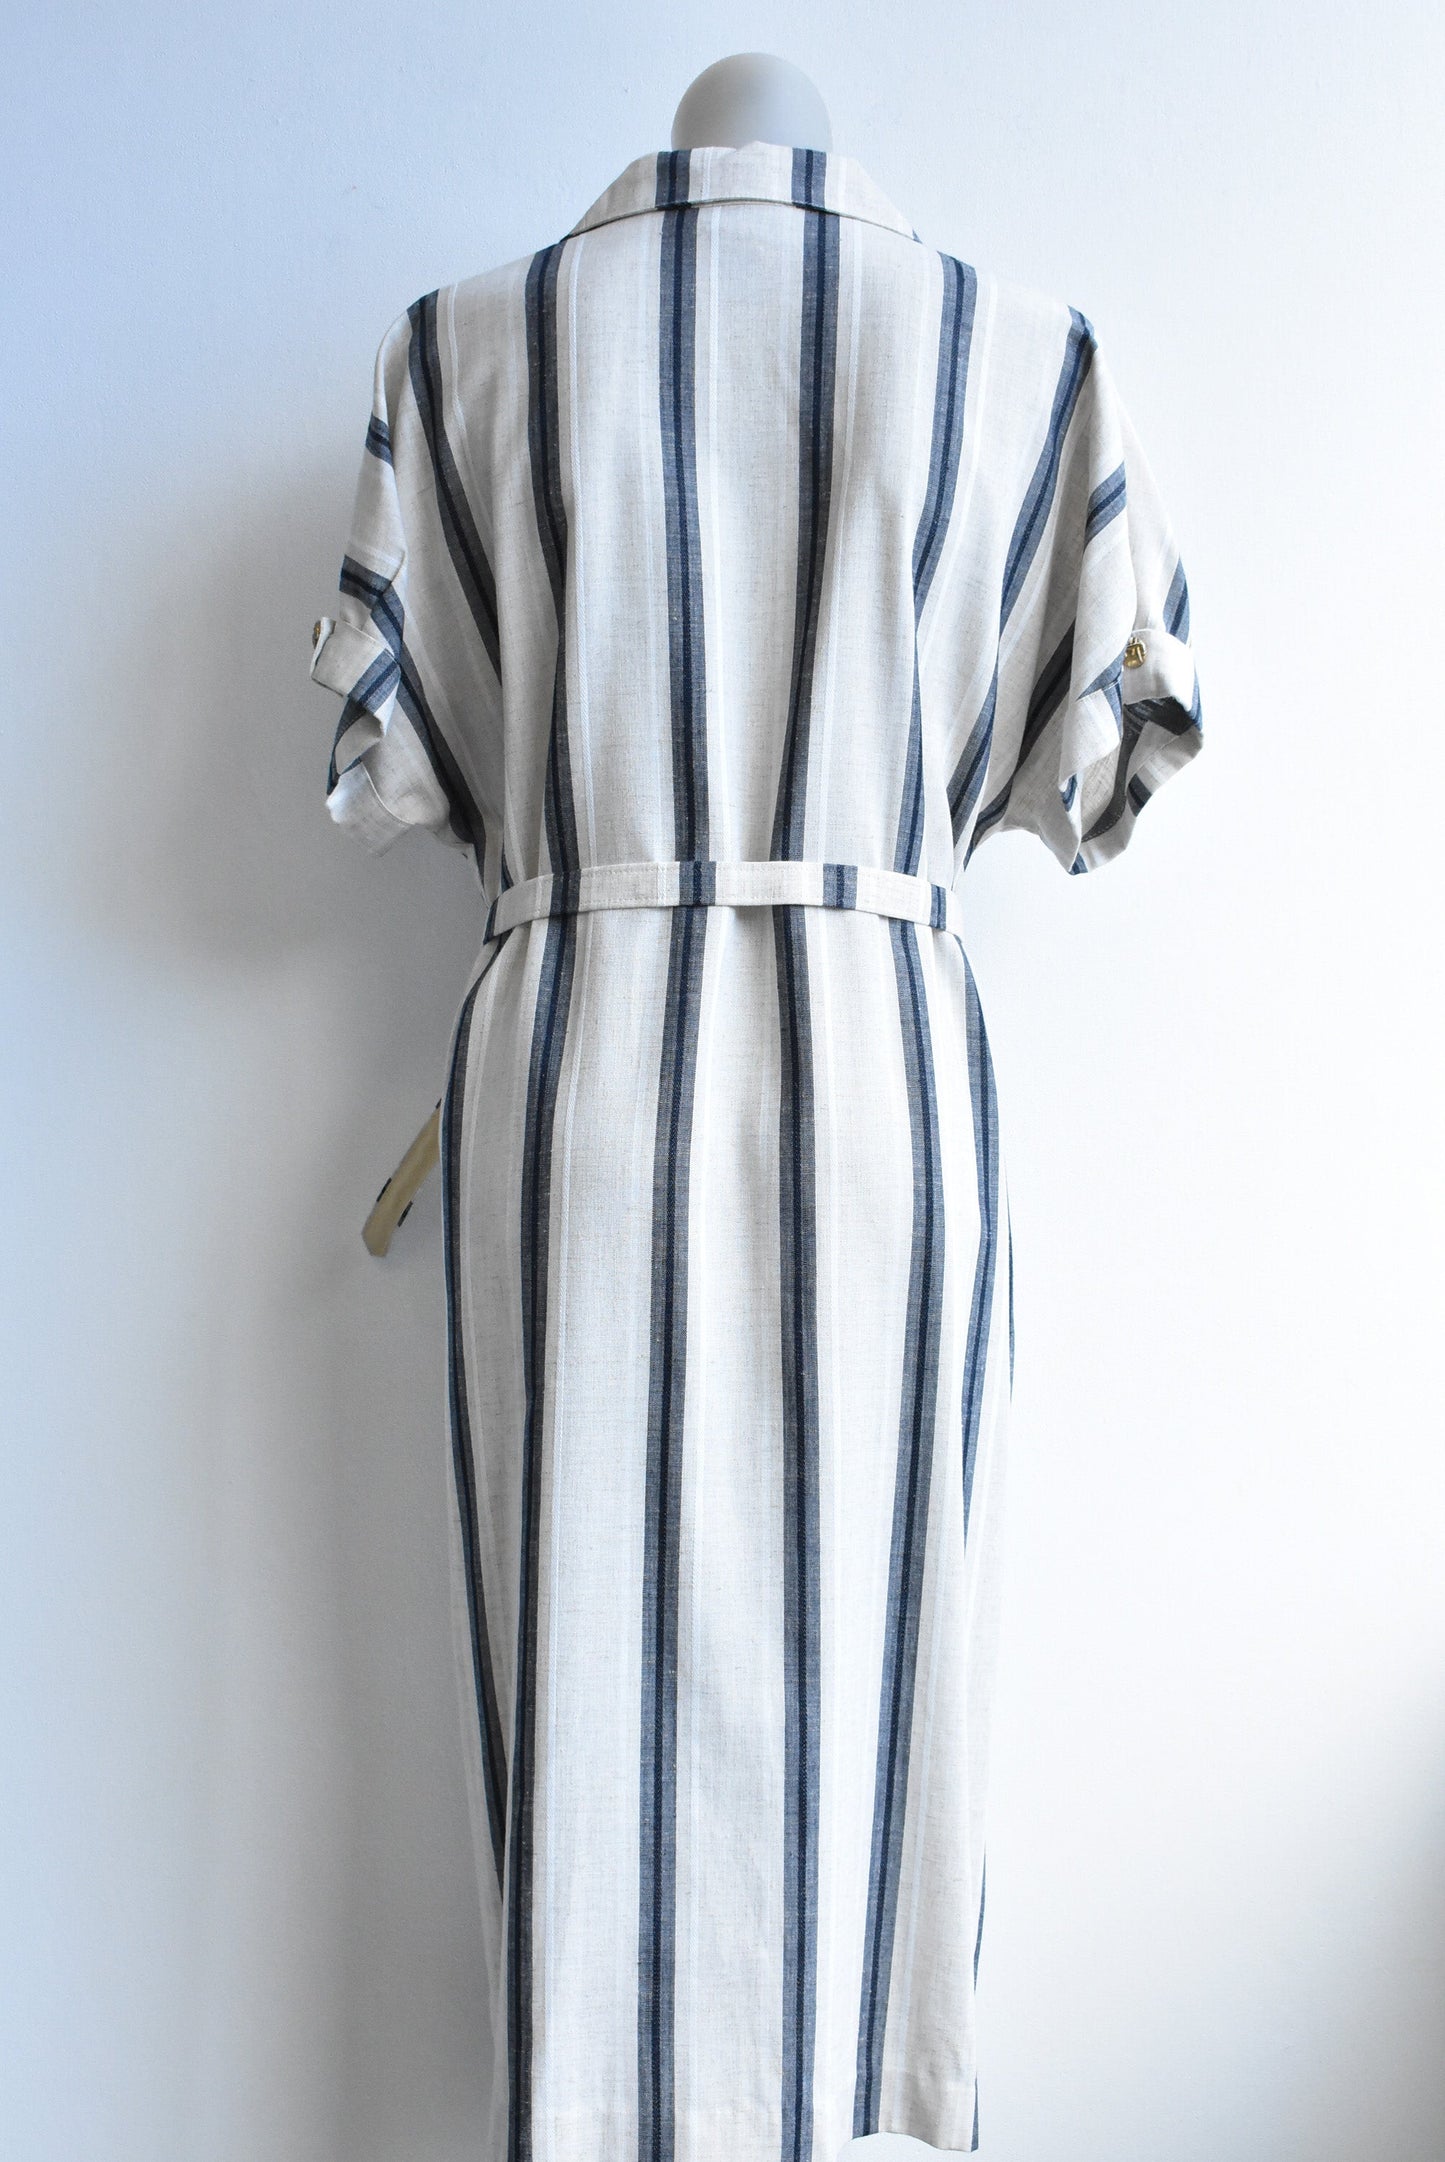 Neater Fashions belted shirt dress, 16 (vintage)